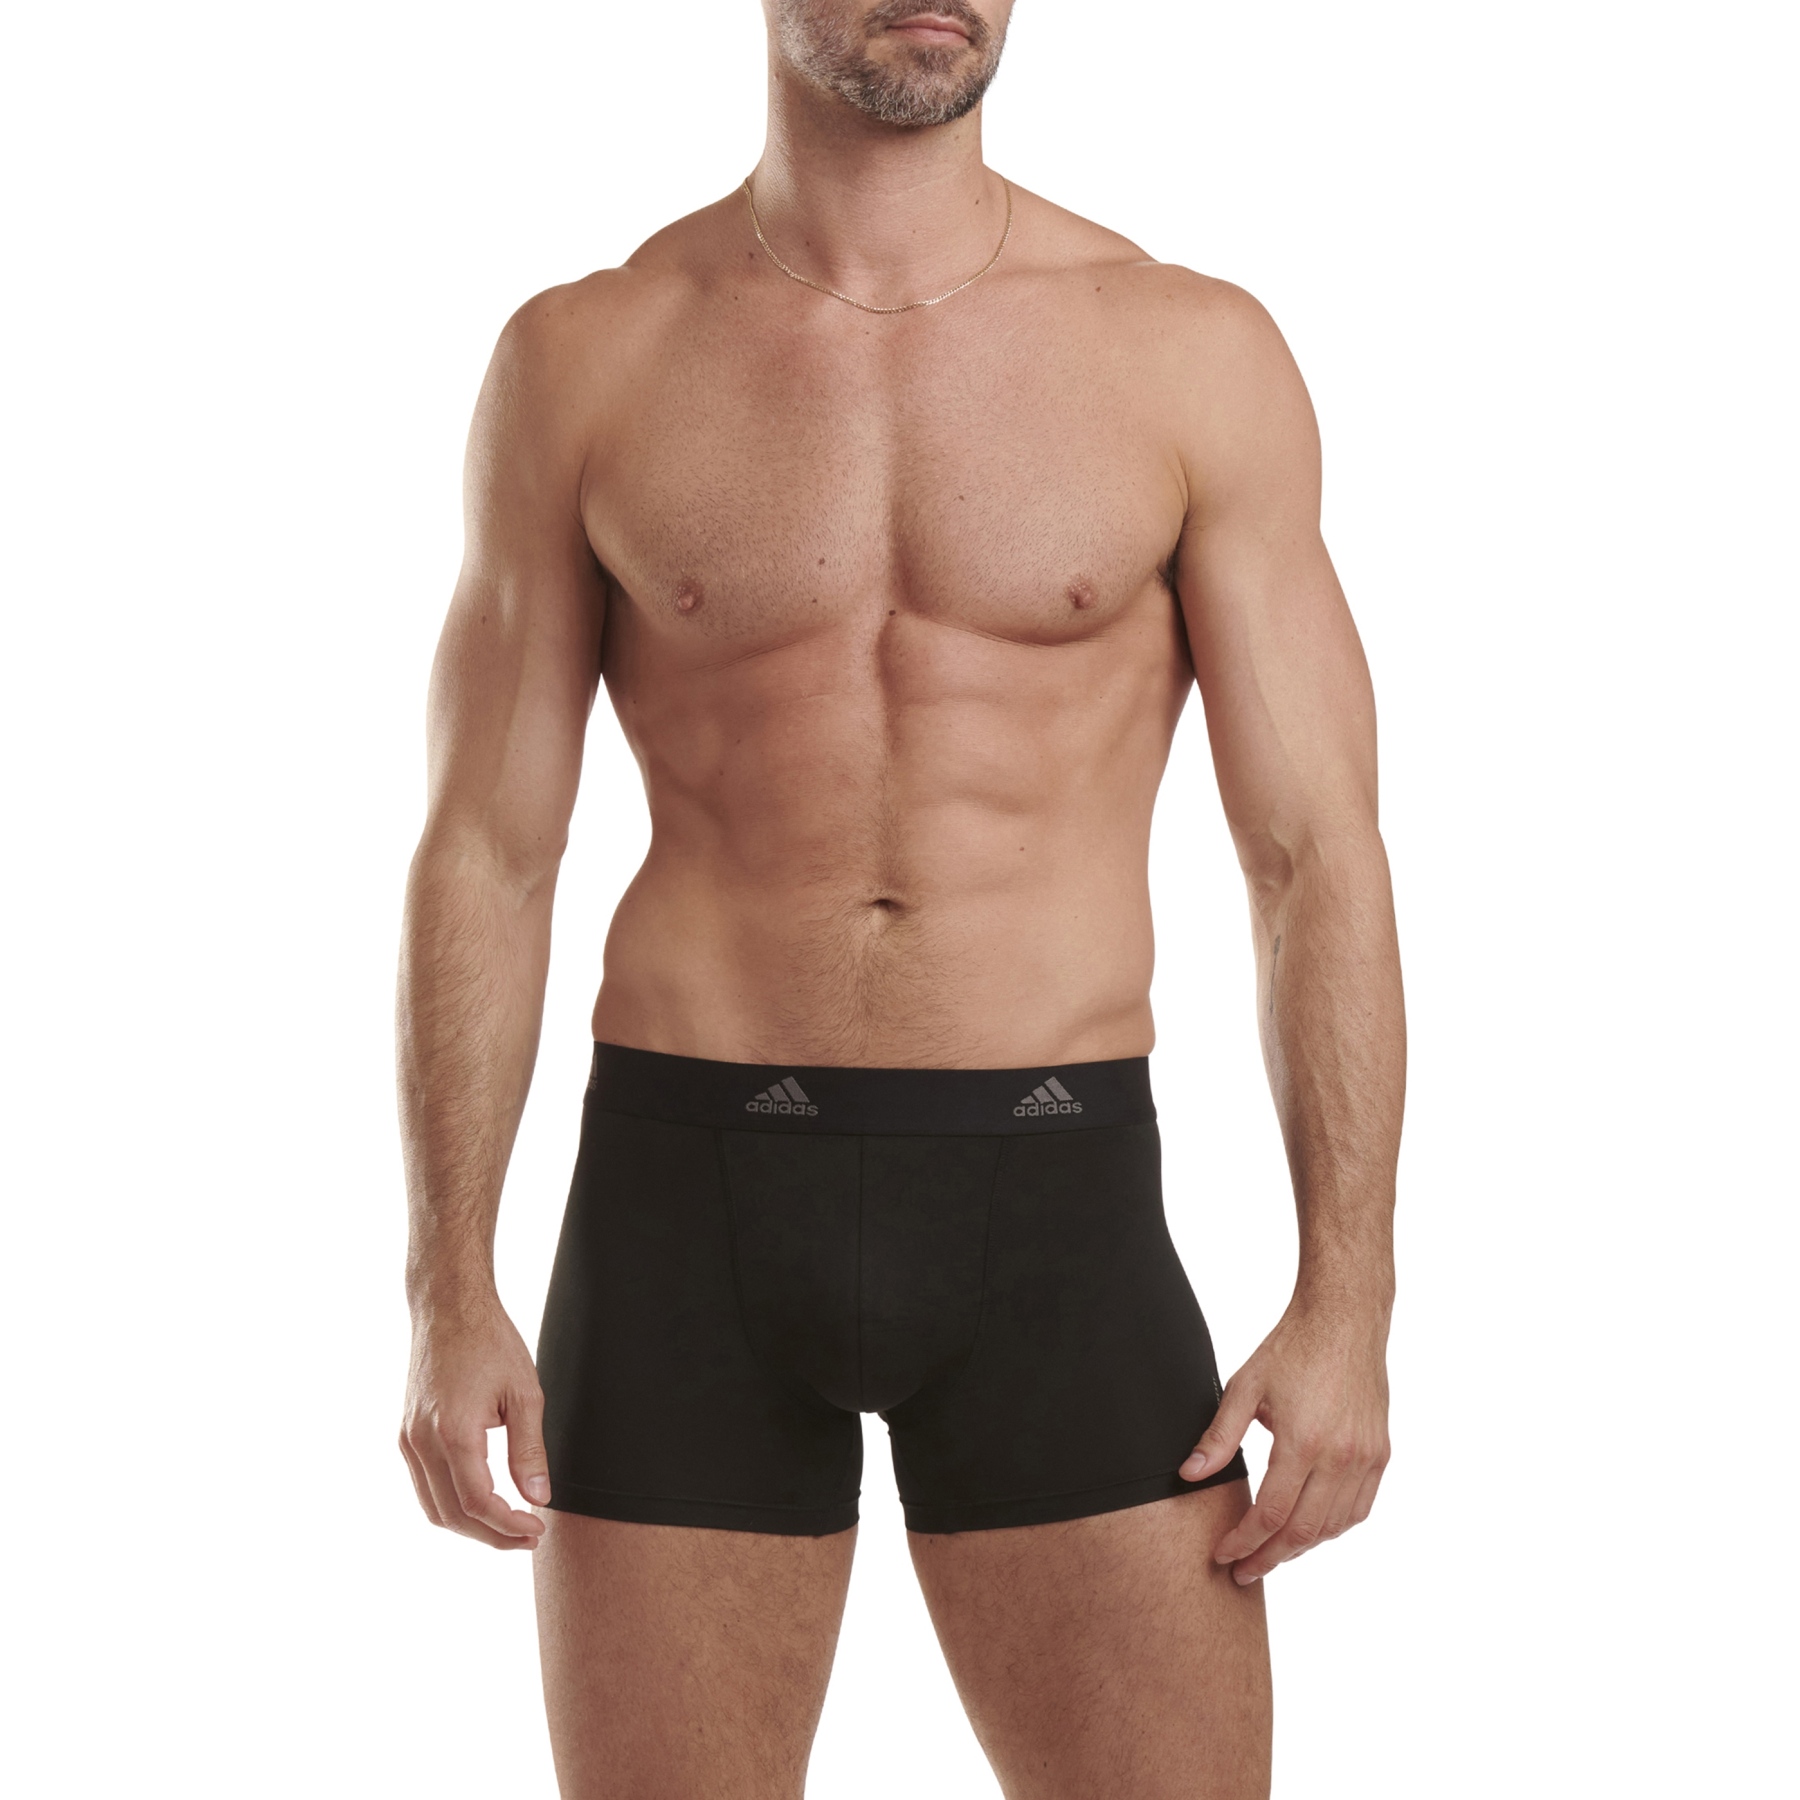 Pack of 3 Retro Active Micro Flex Eco Boxer Shorts by adidas